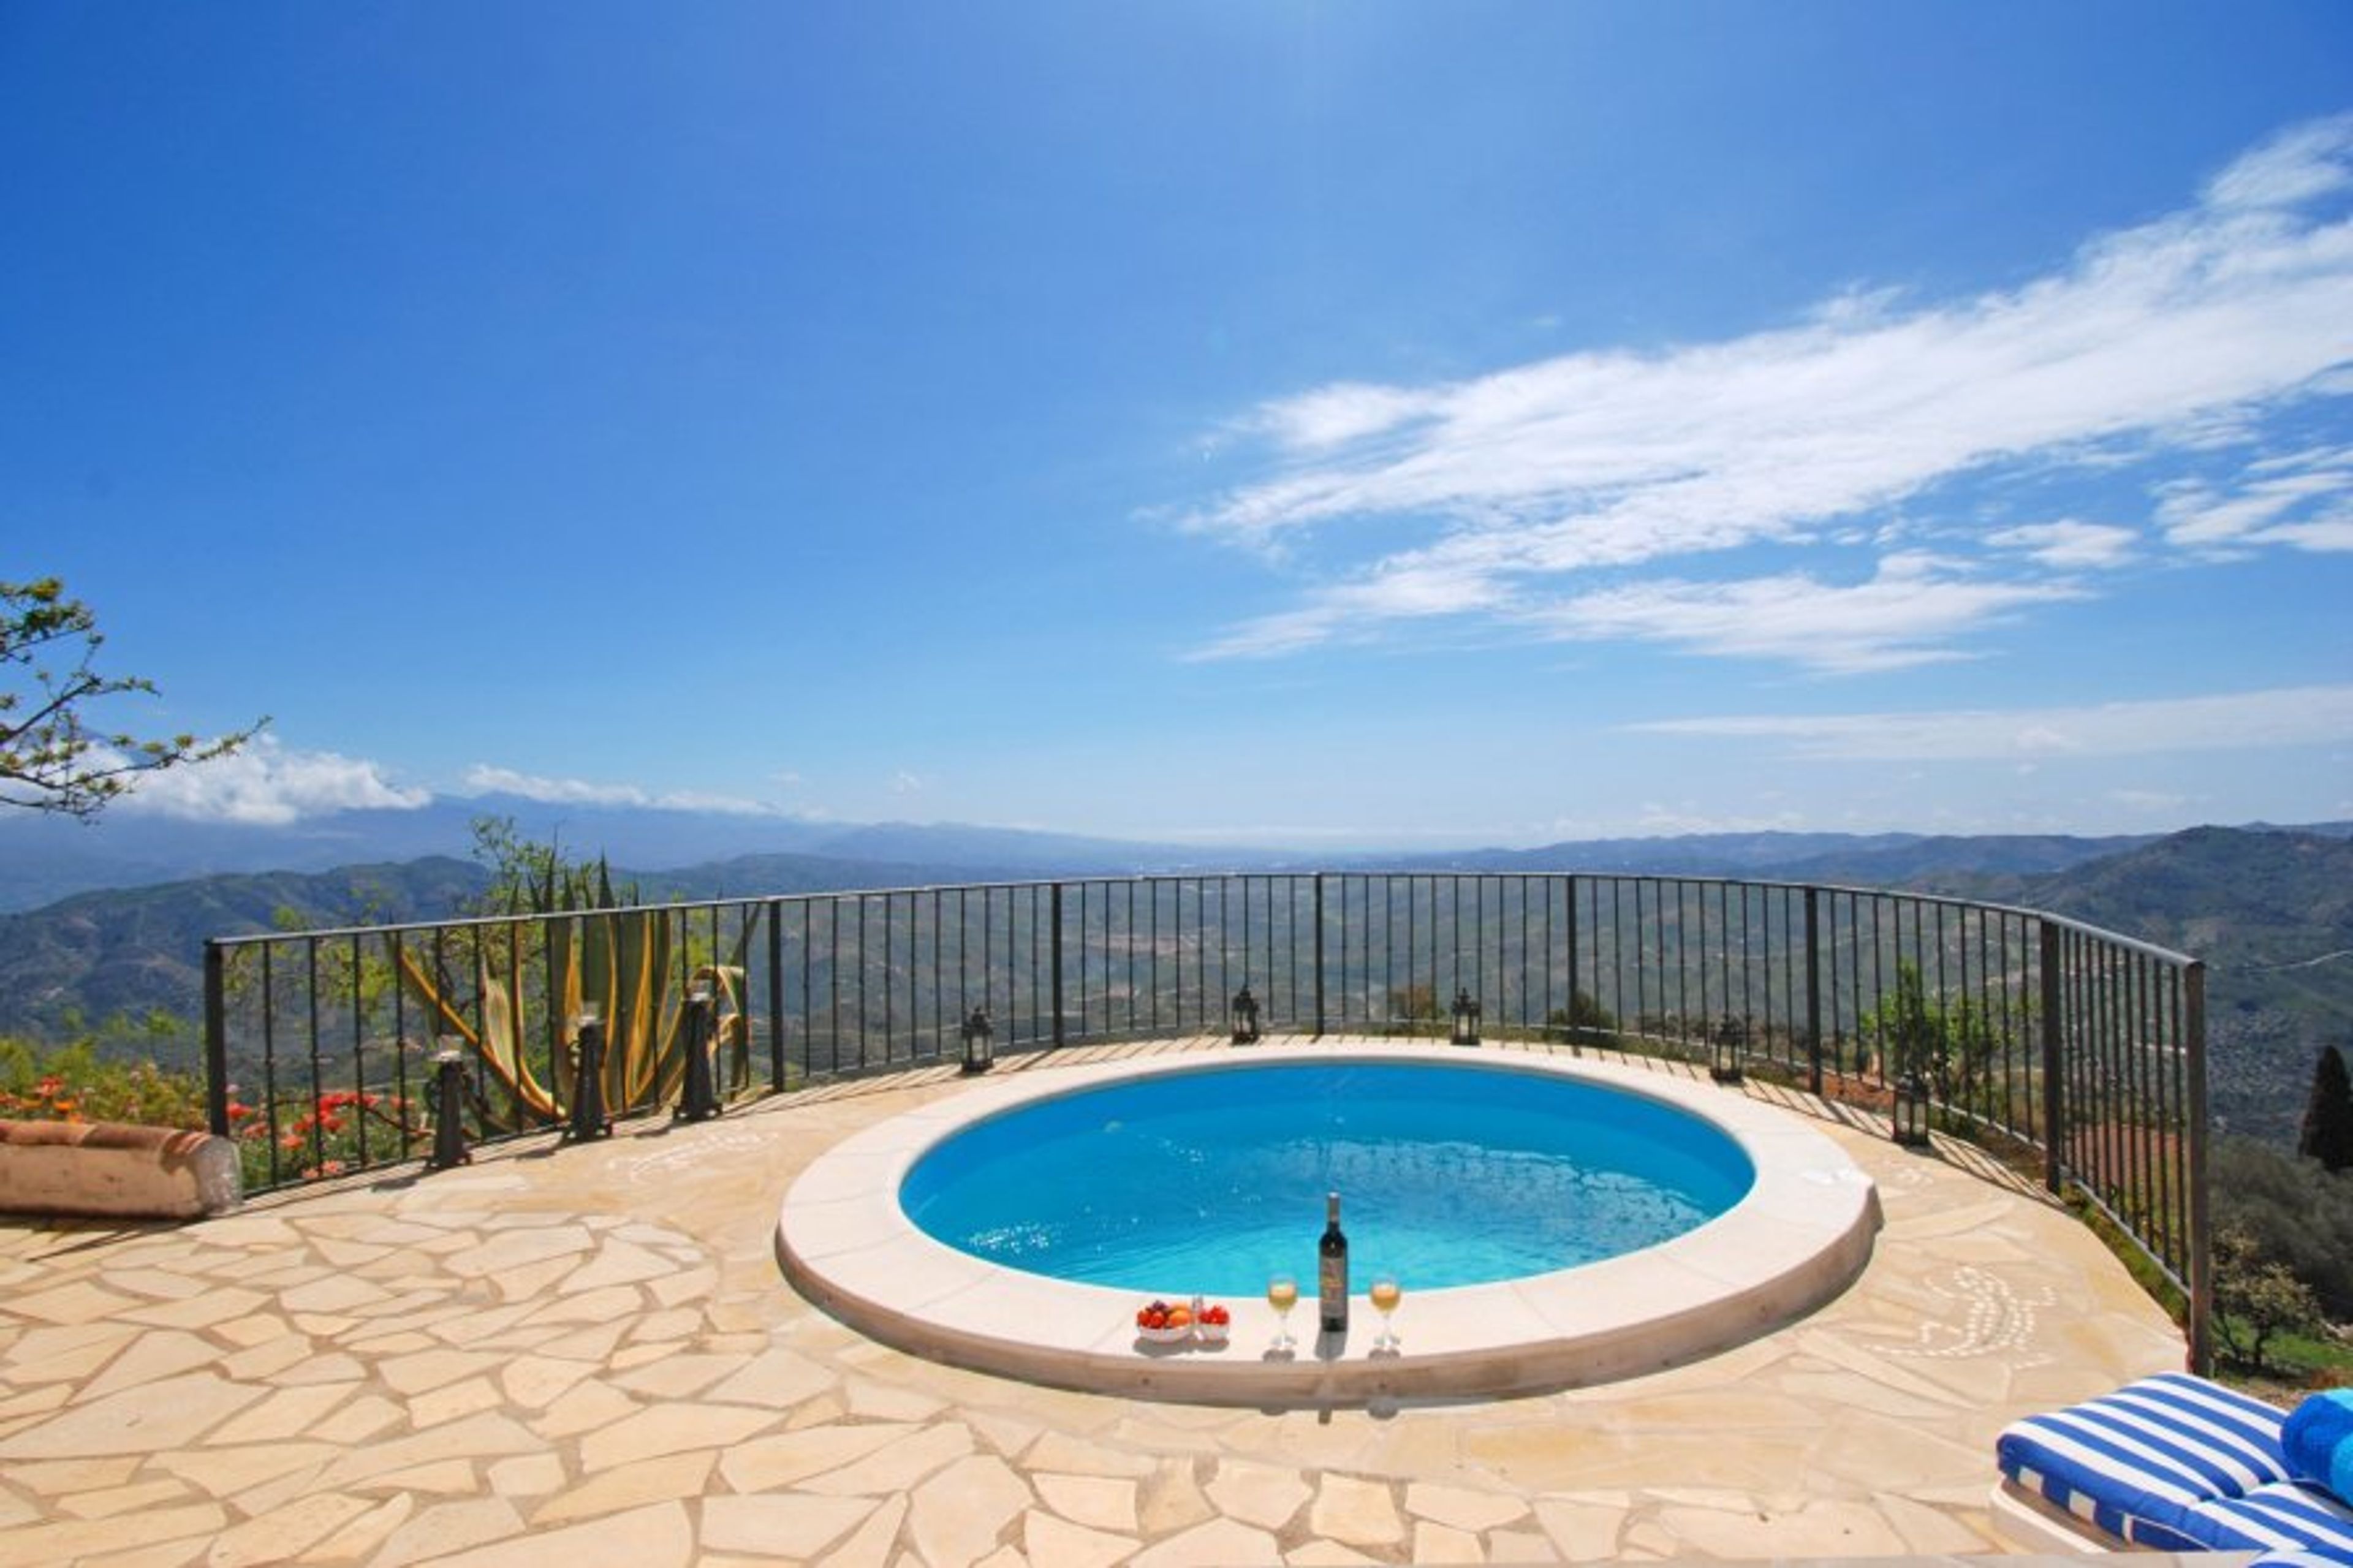 From the pool you can look over the mountains to the Med.